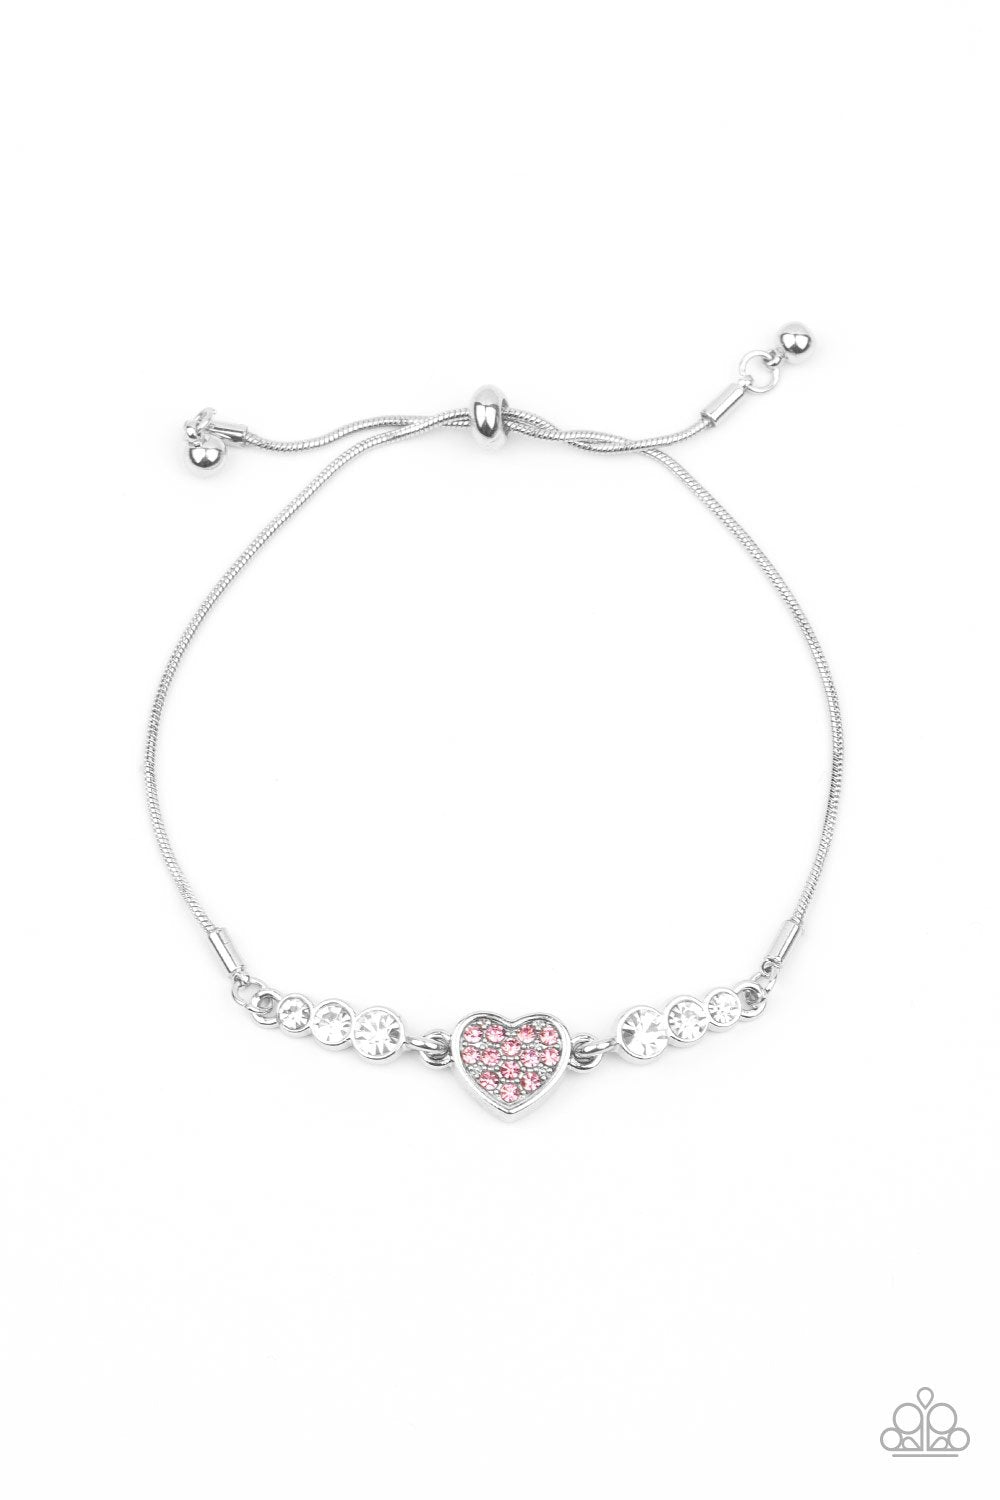 Big-Hearted Beam Pink Rhinestone Heart Slide Bracelet - Paparazzi Accessories LOTP Exclusive January 2021 - lightbox -CarasShop.com - $5 Jewelry by Cara Jewels